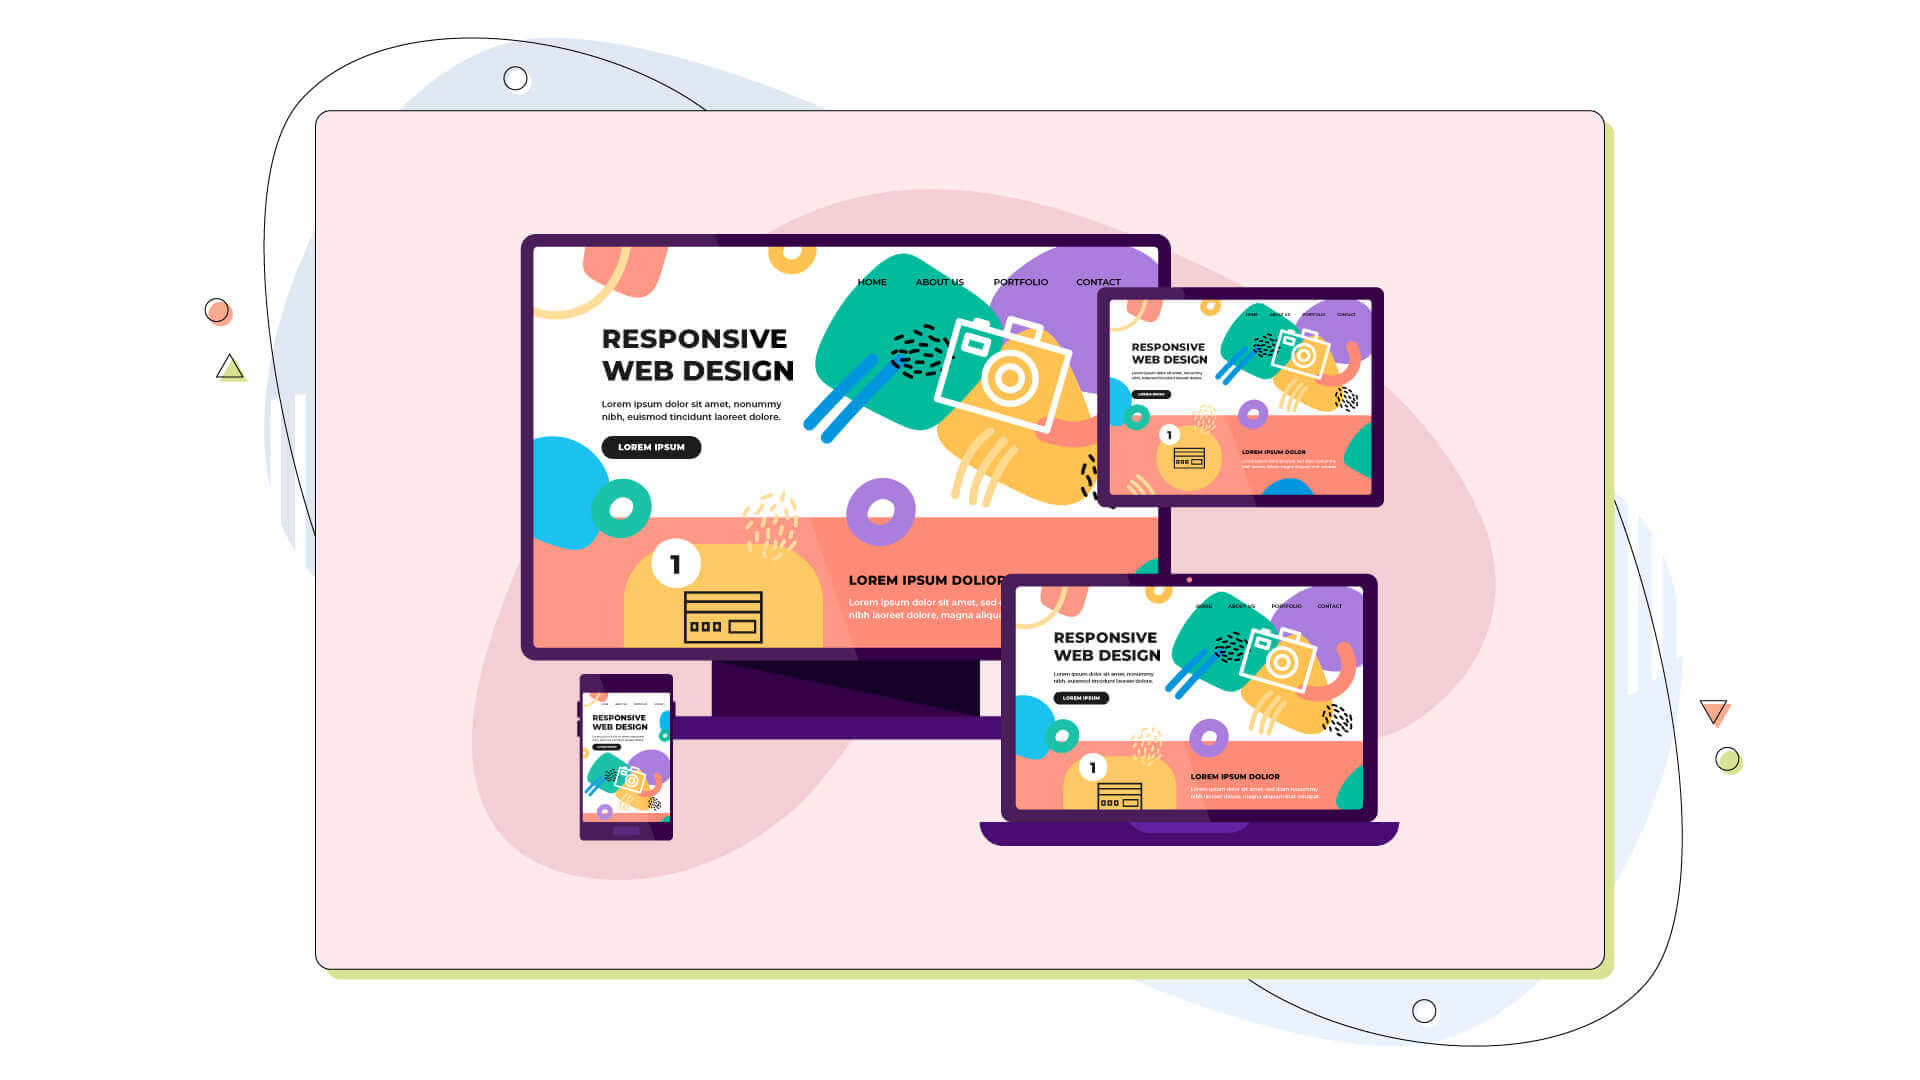 How to Make Your Website Mobile Friendly (2023) - Easy Guide